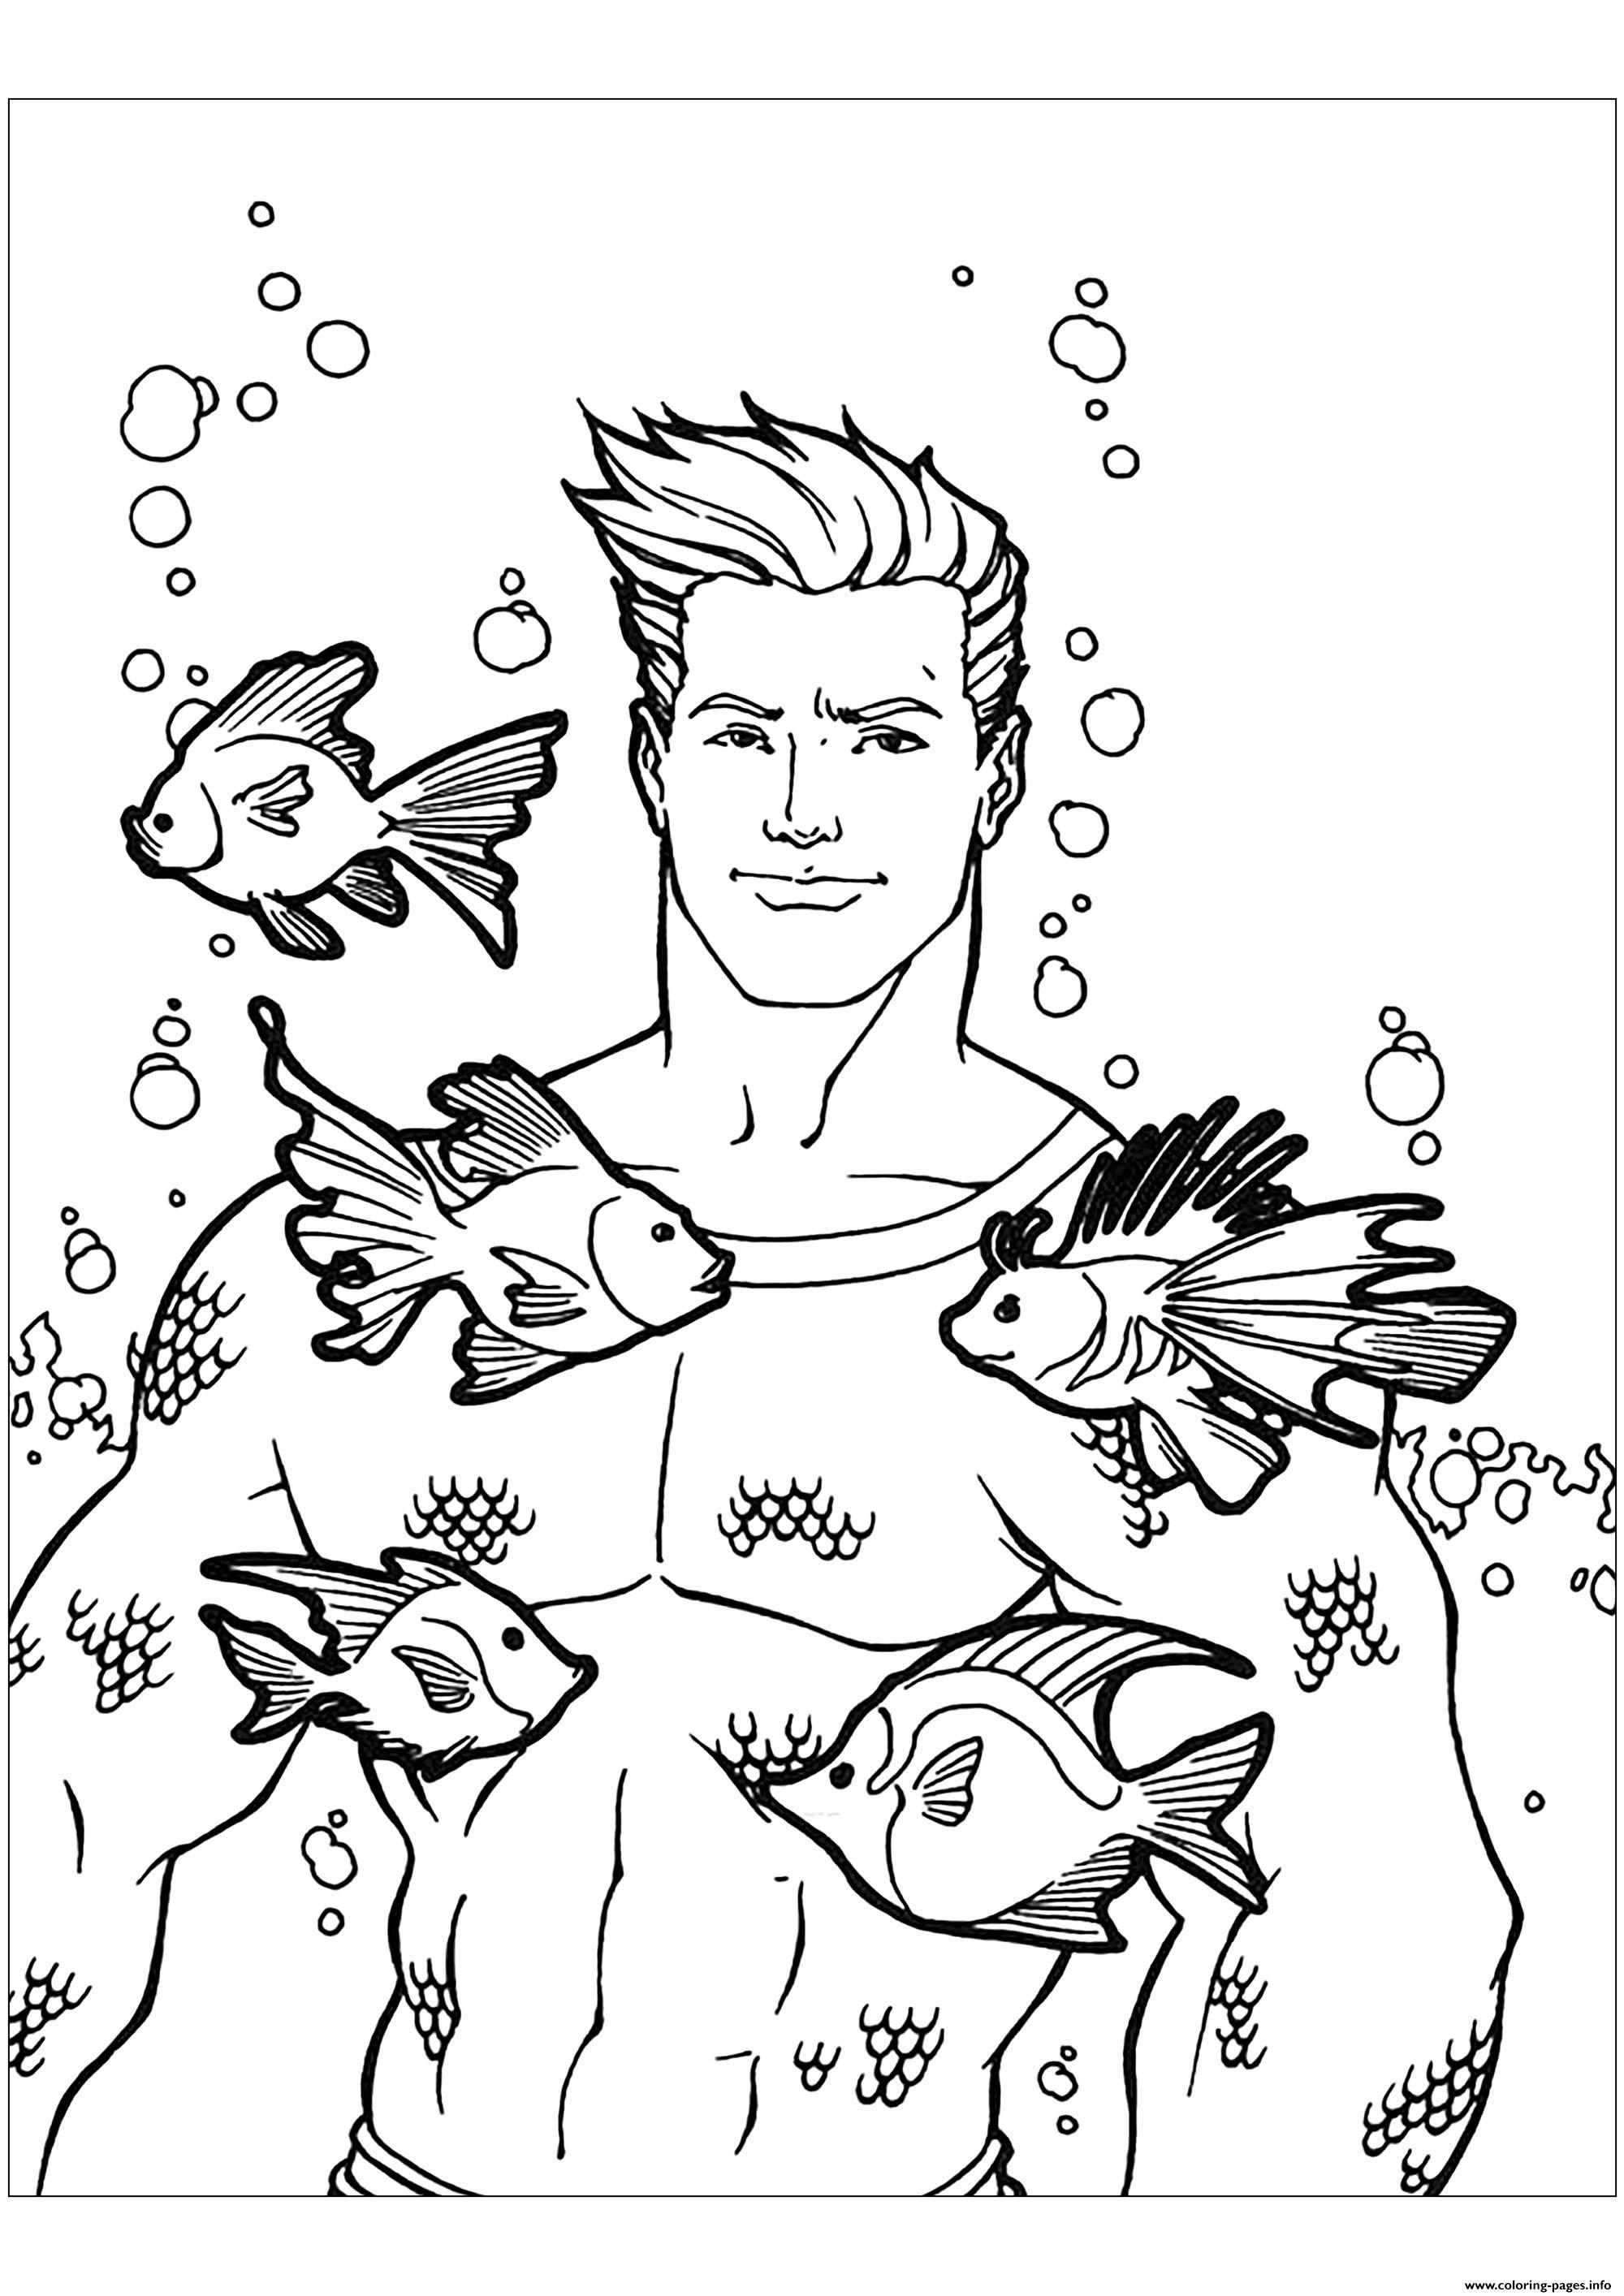 Aquaman With Fishes coloring